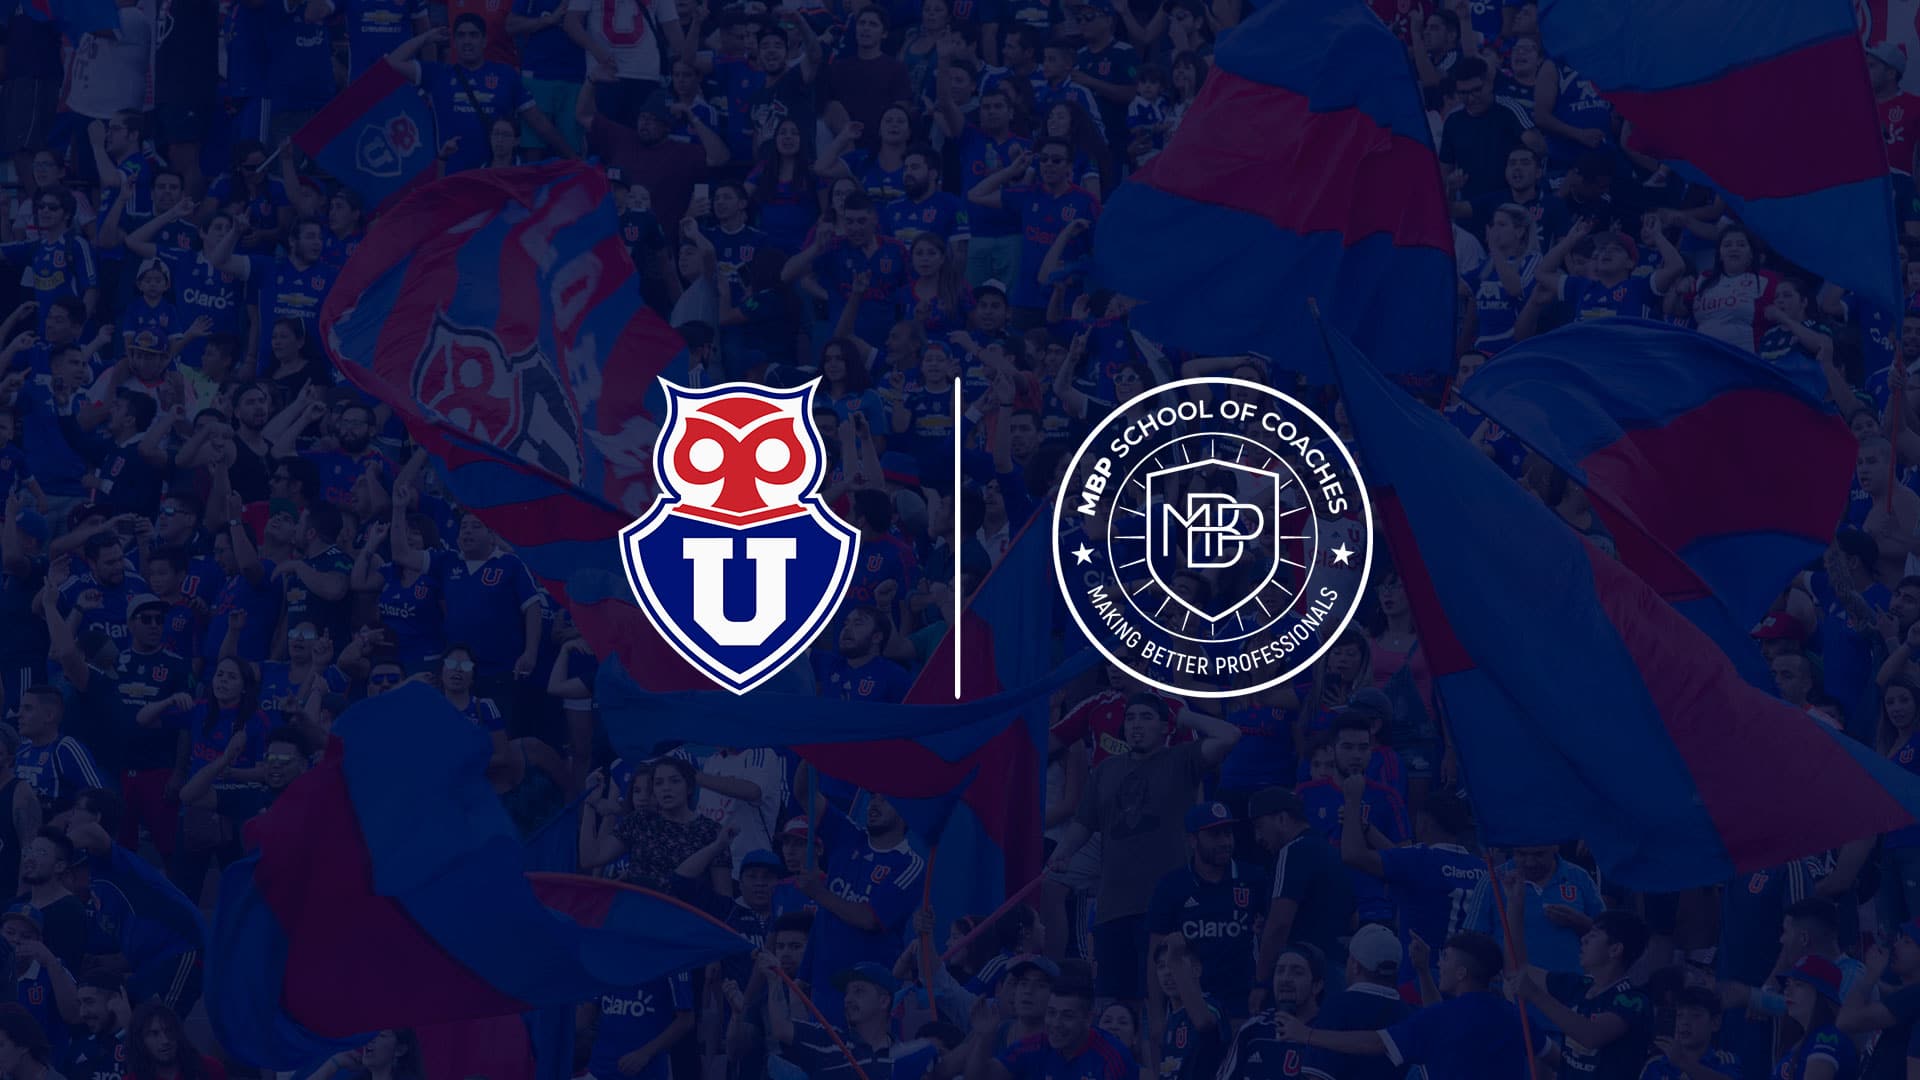 You are currently viewing PRESS RELEASE: MBP REACHES AN AGREEMENT WITH CLUB UNIVERSIDAD DE CHILE